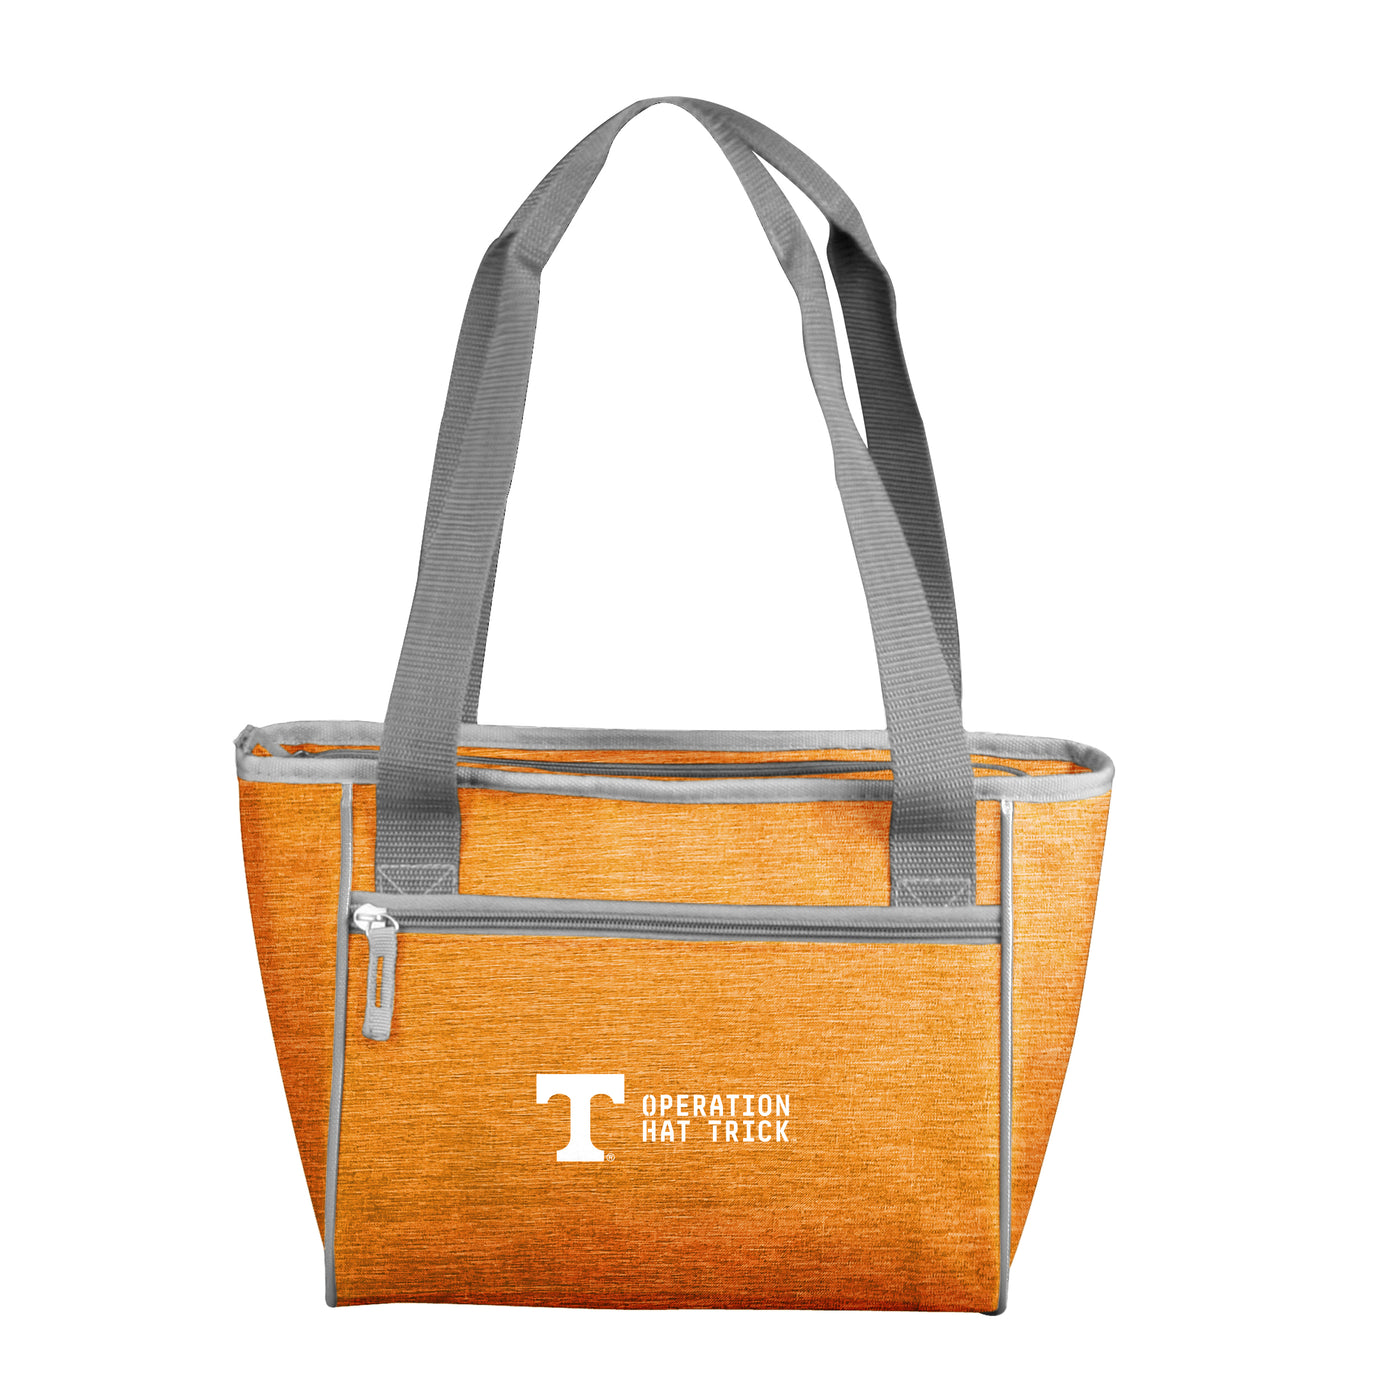 Tennessee Operation Hat Trick 16 Can Cooler Tote